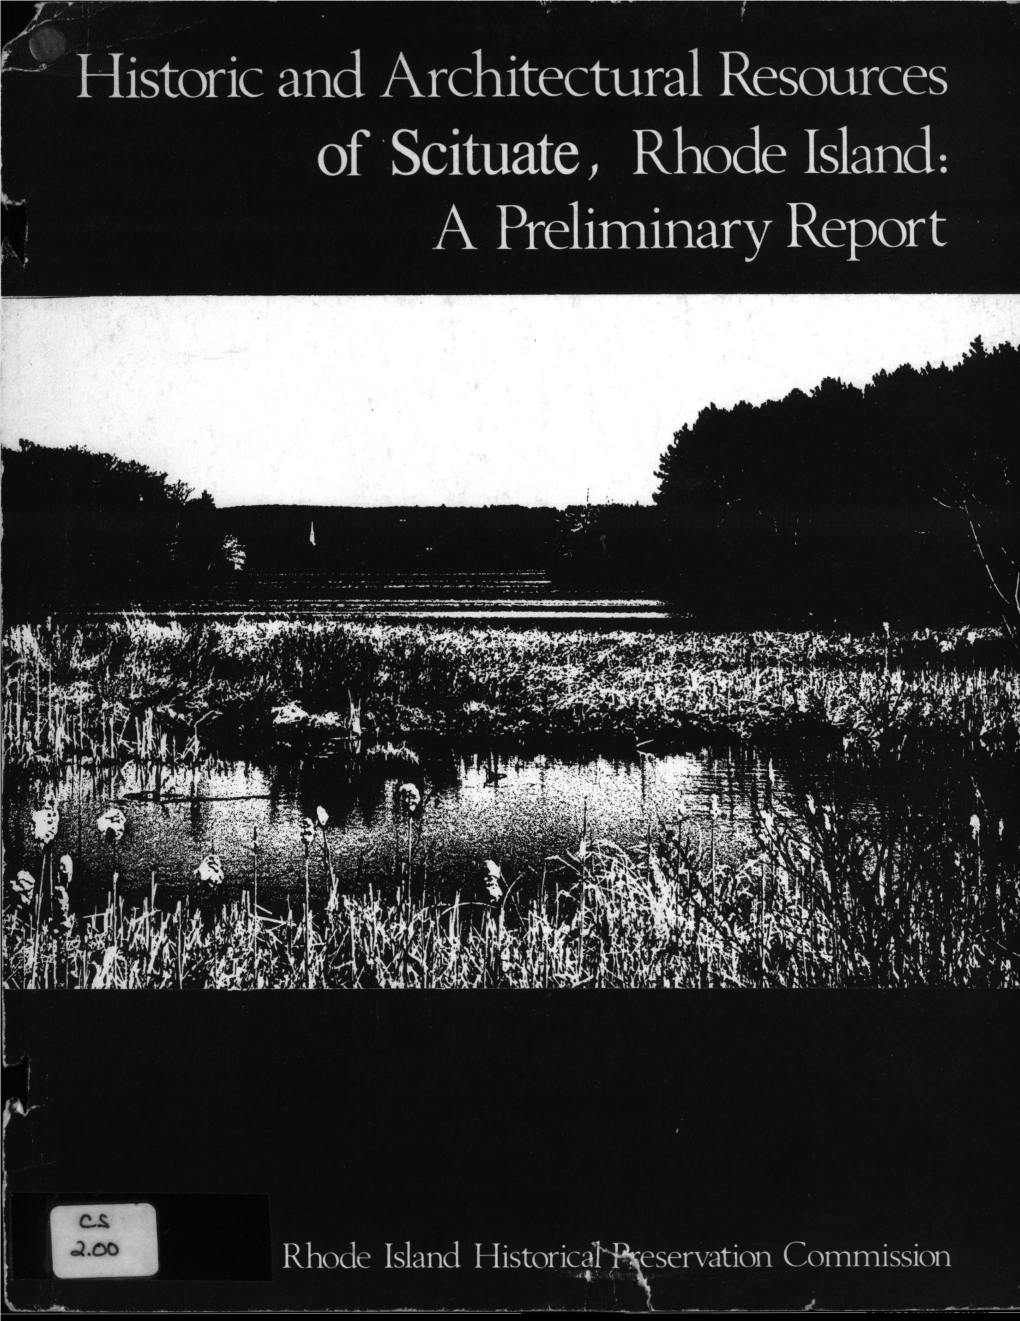 Historic and Architectural Resources of Scituate, Rhode Island: a Preliminary Report STATE OP RHODE ISLAND and PROVIDENCE PLANTATIONS